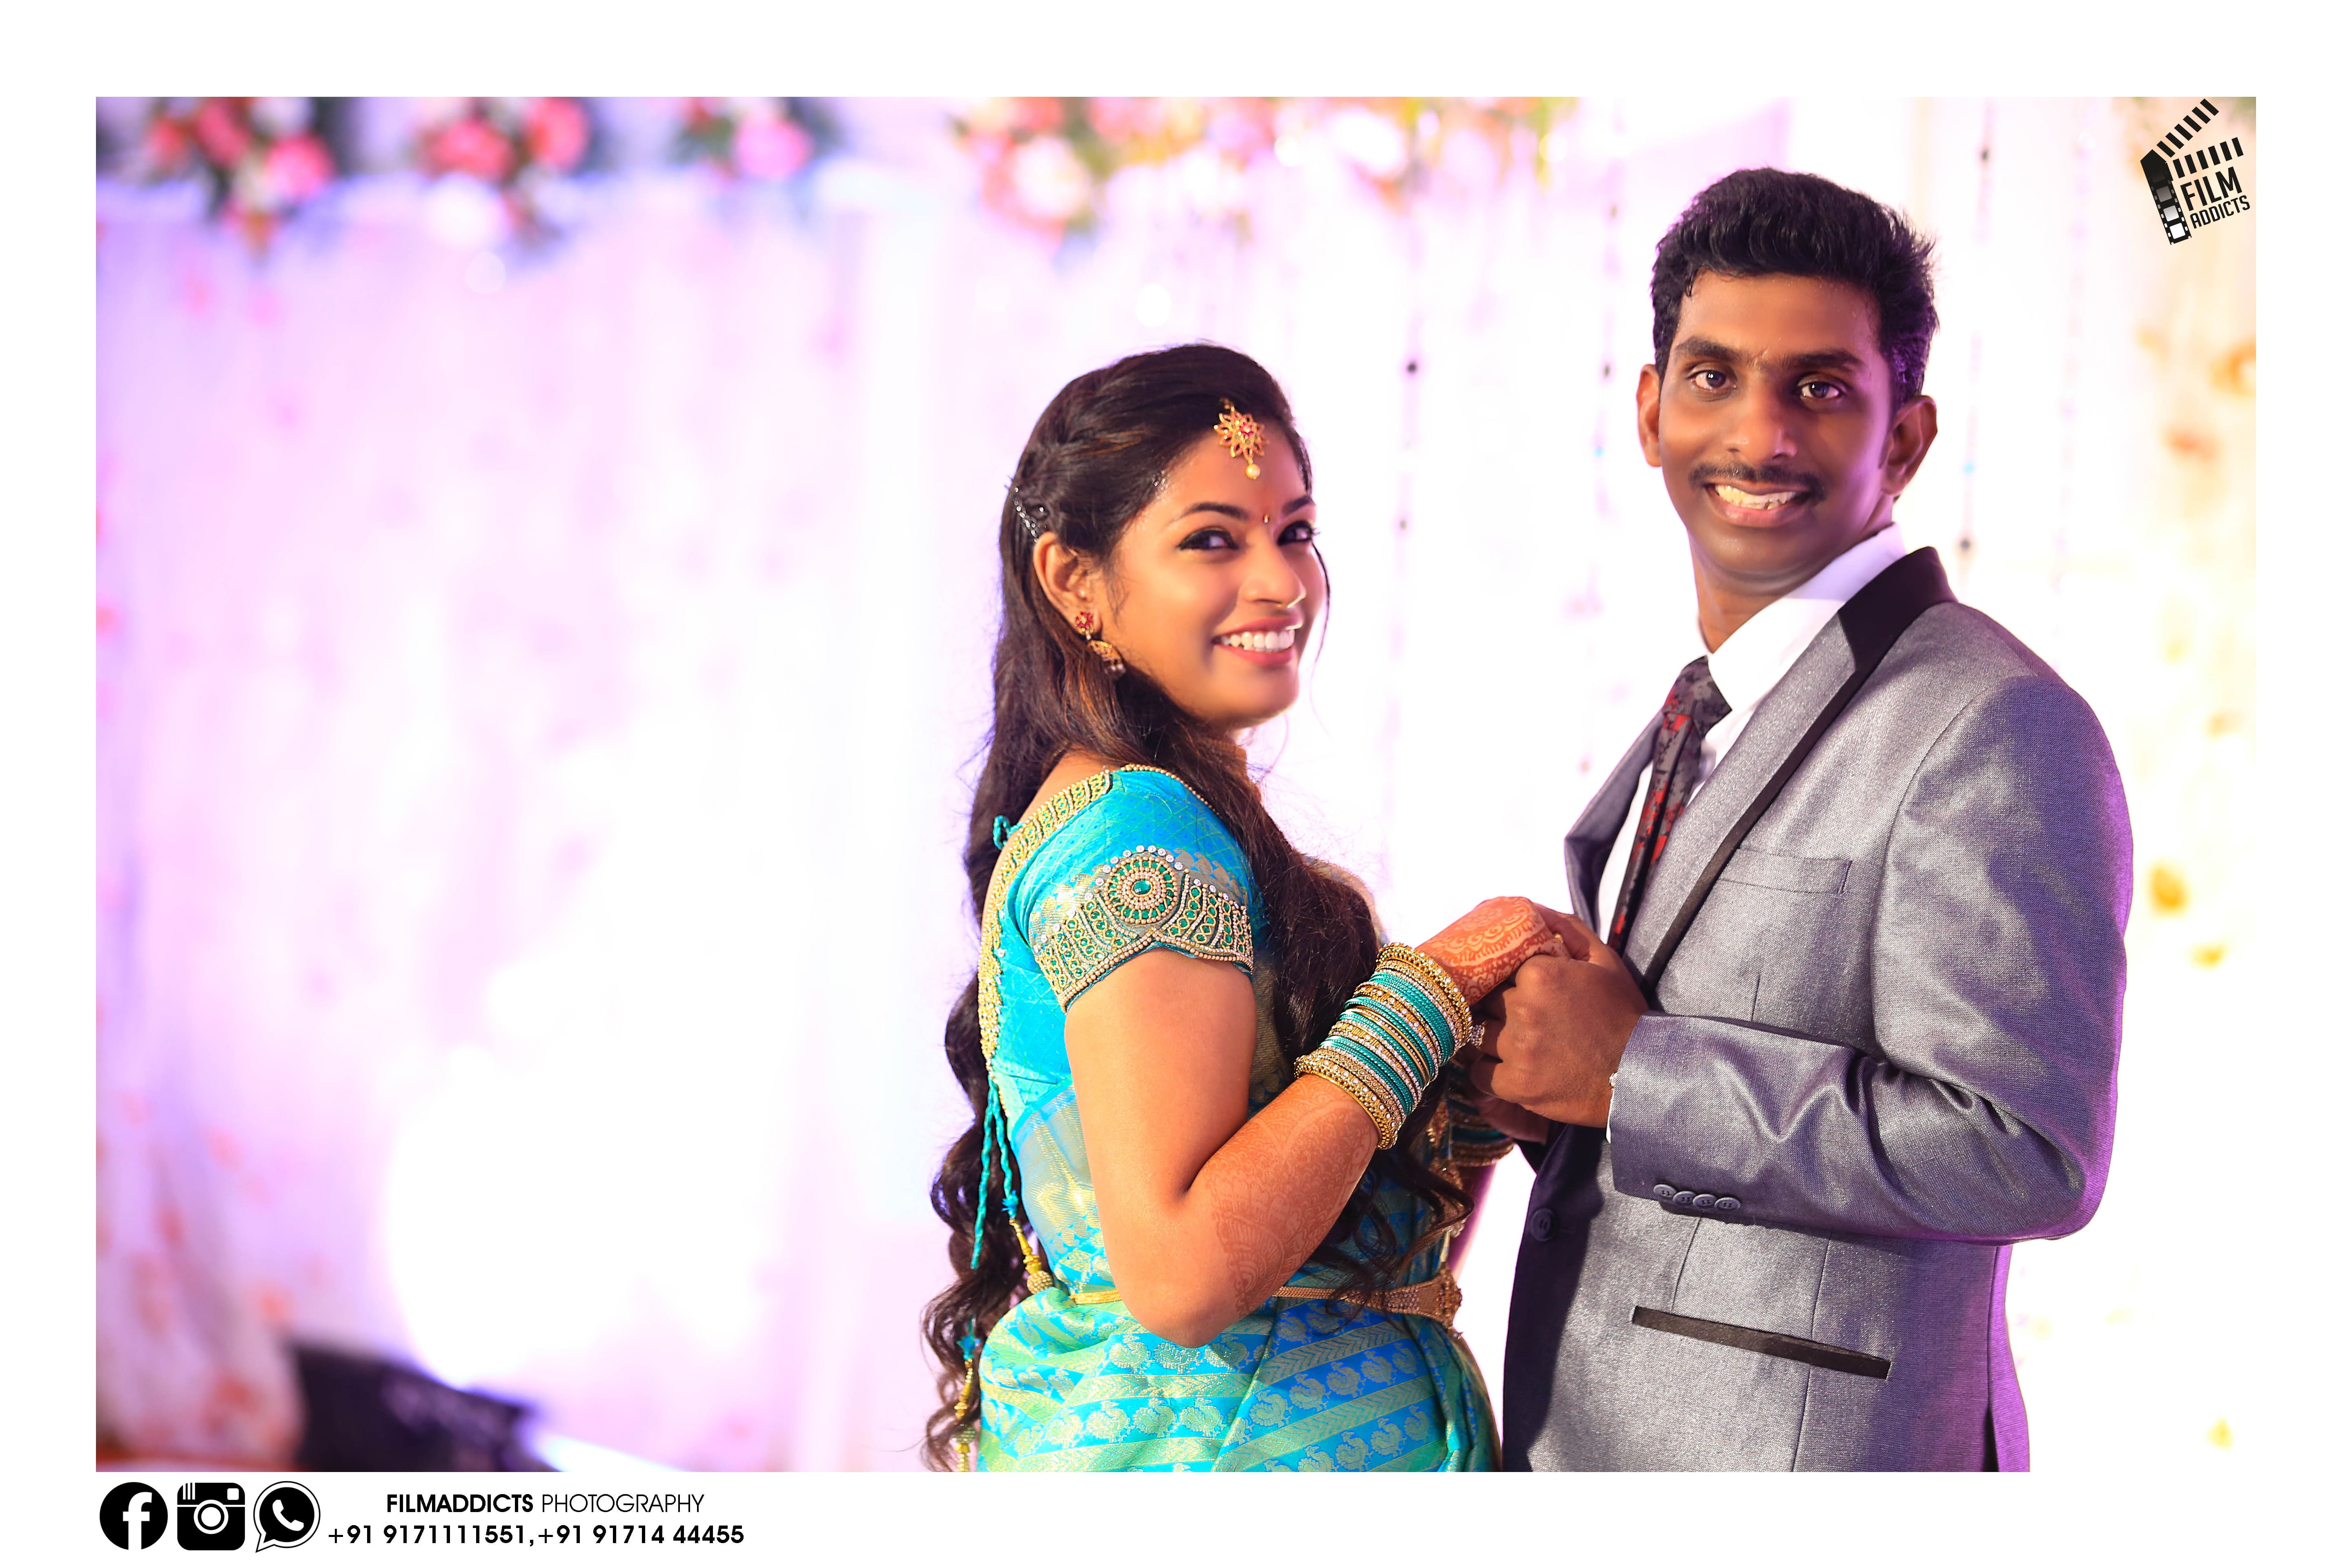 Best candid wedding photographers in chennai Tamilnadu wedding photos takes  a speacial place in a couple's home - as well as in their relative's home  in chenna…